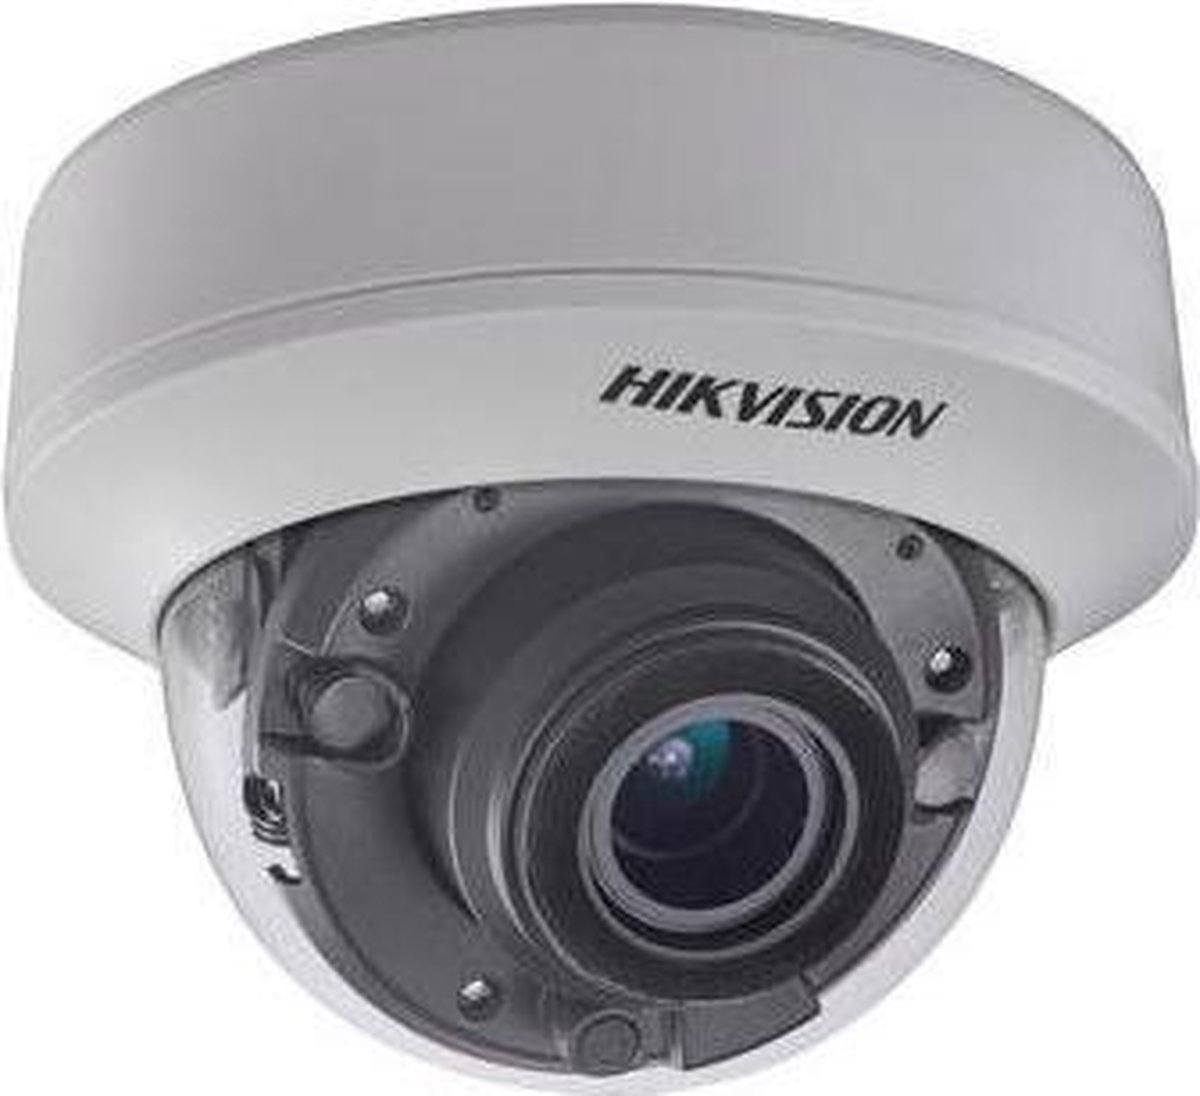 Hikvision Digital Technology DS-2CE56D7T-ITZ(2.8-12MM) CCTV security camera Binnen Dome Wit bewakingscamera